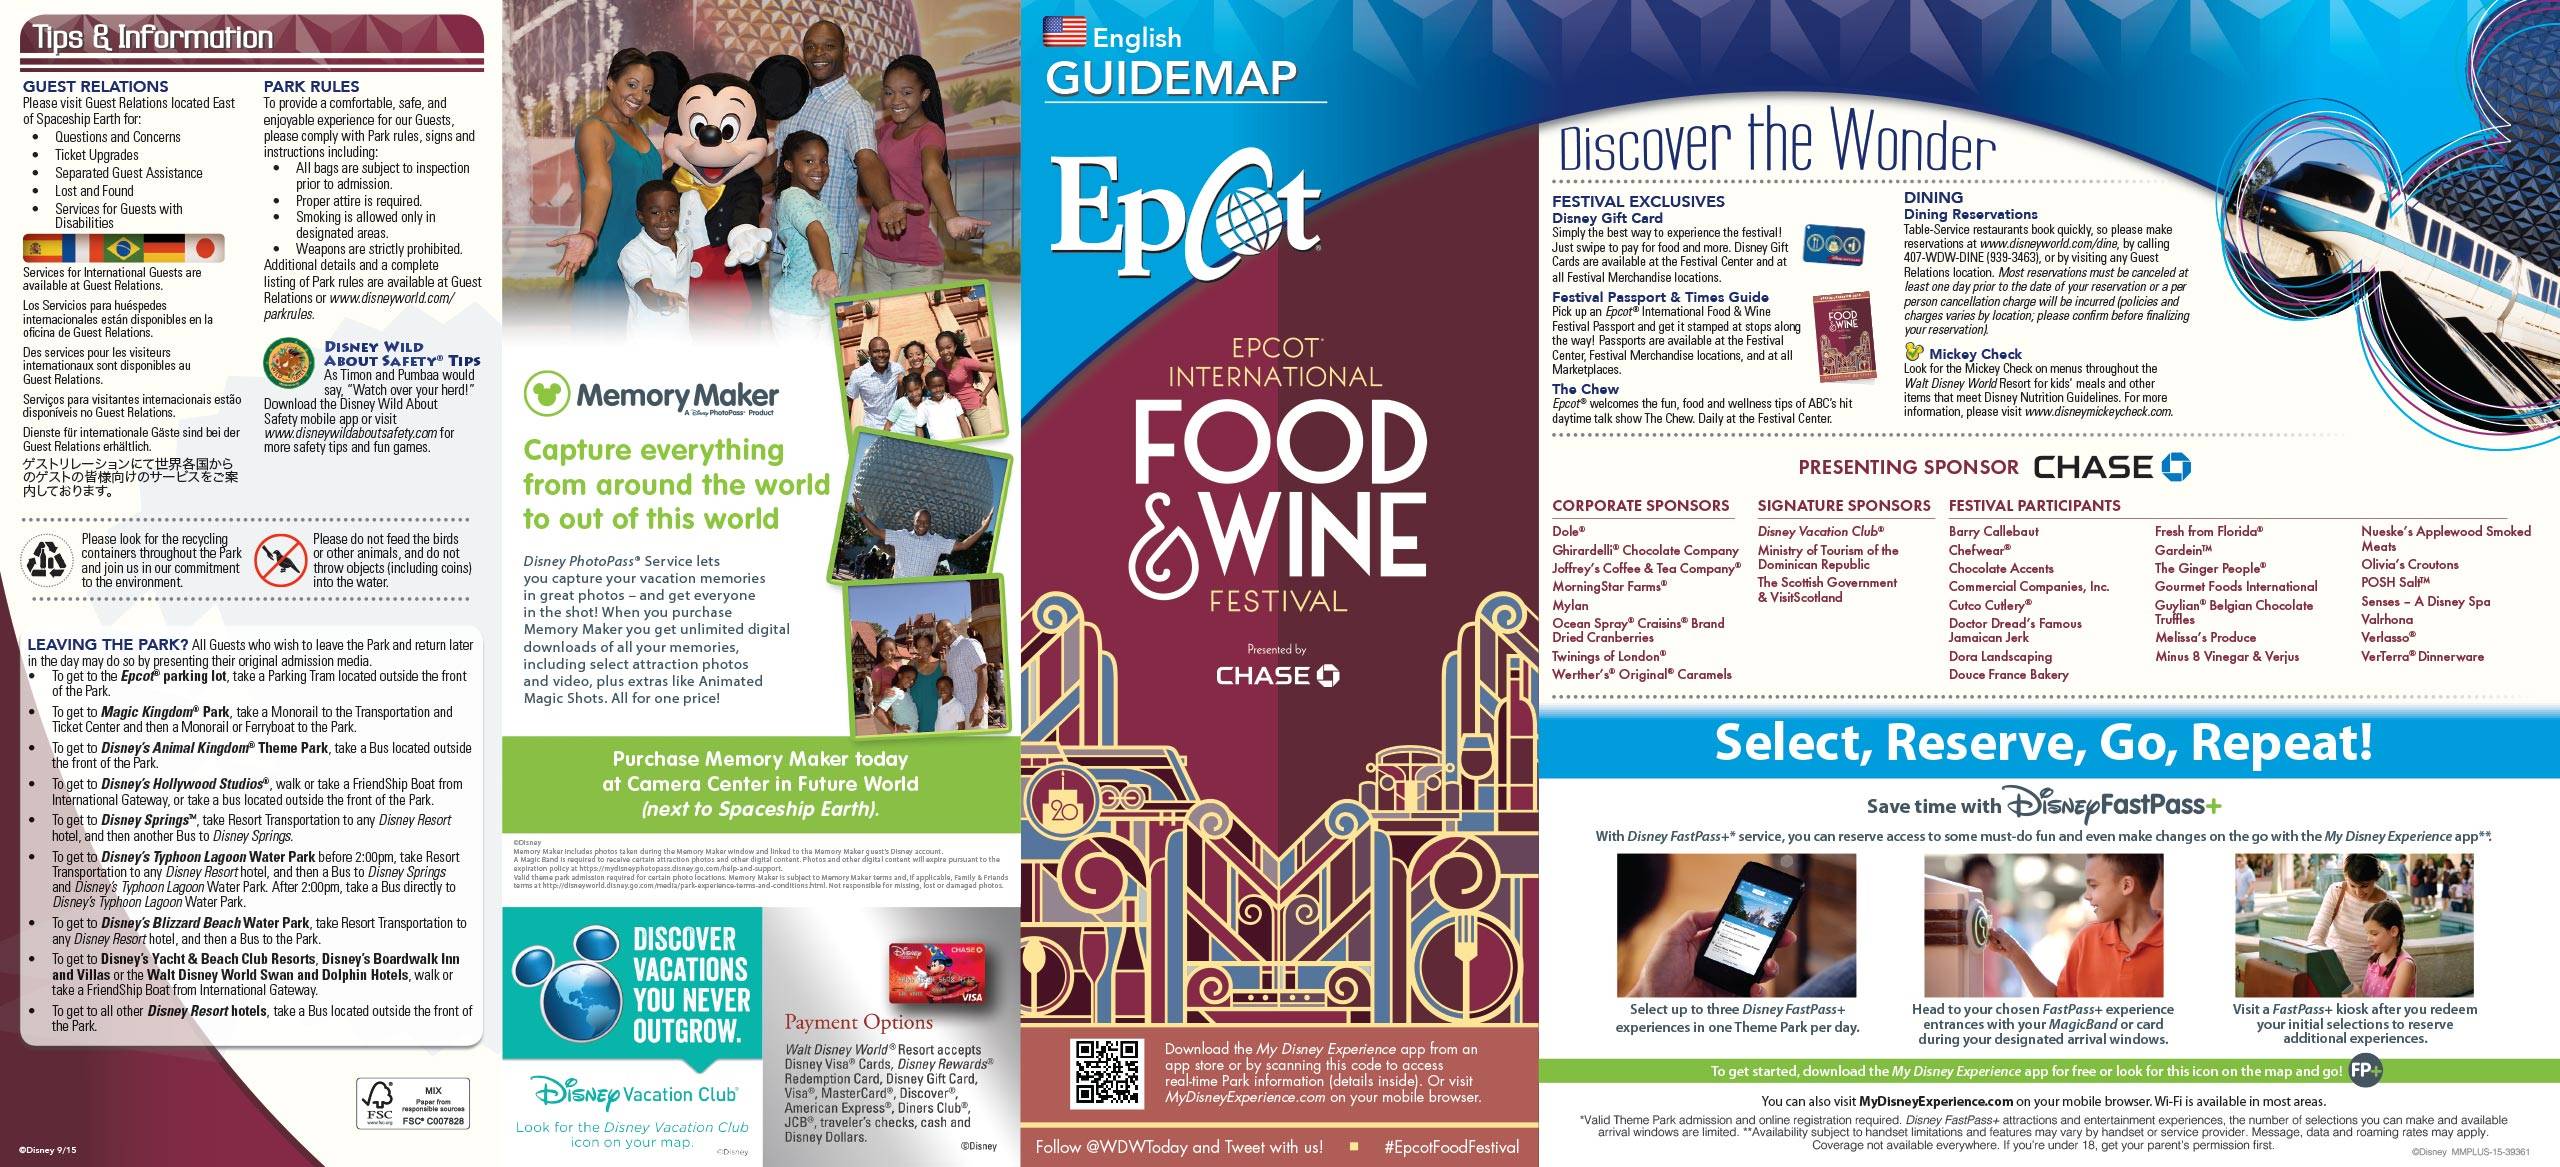 PHOTOS - 2015 Epcot Food and Wine Festival Guide Map